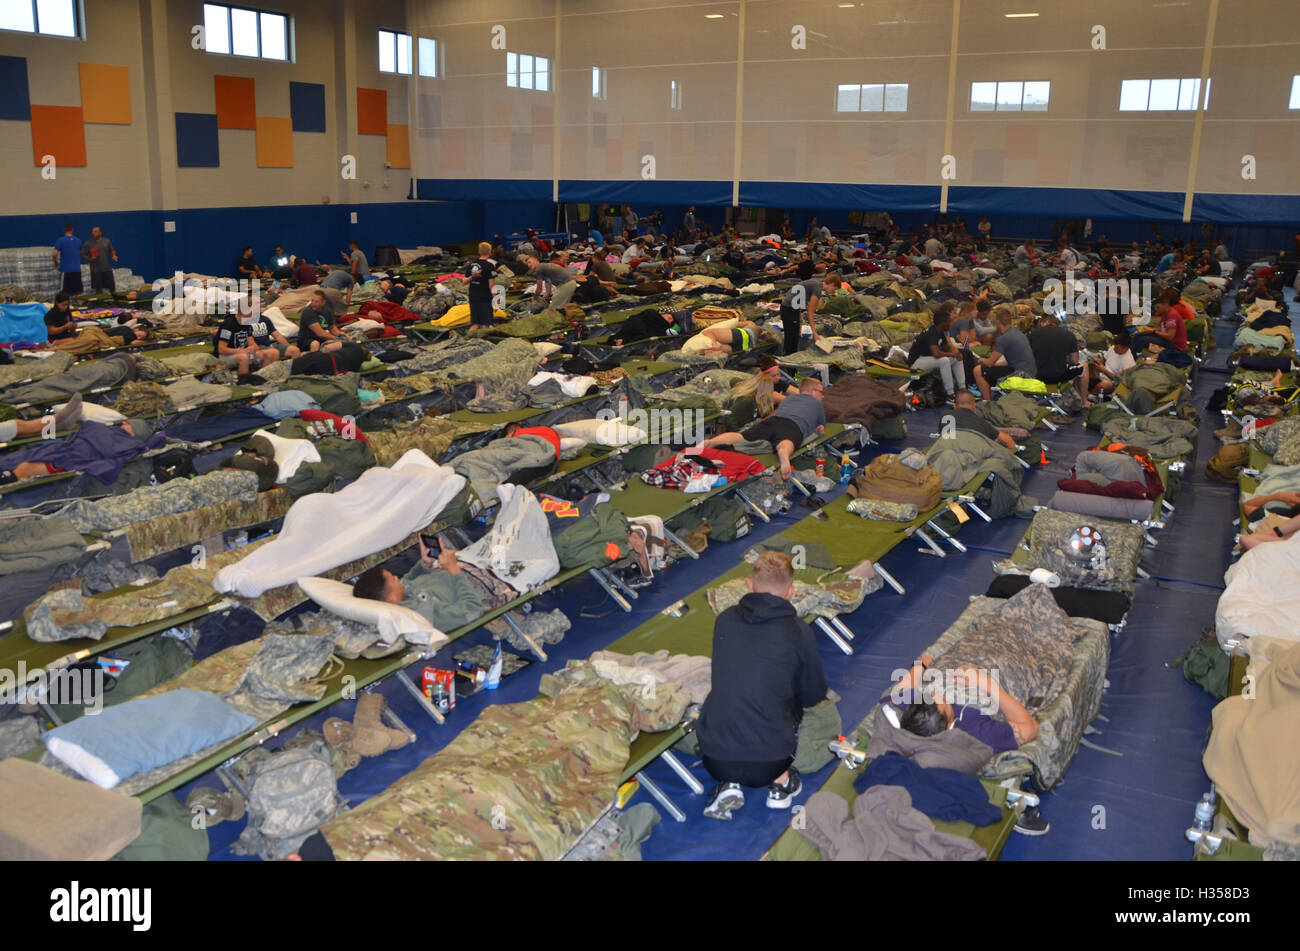 Guantanamo Bay, Cuba. 4th October, 2016. U.S. service members pack into the Denich Gym set up as an emergency shelter at Joint Task Force Guantanamo Bay in preparation for Hurricane Matthew October 4, 2016 in Guantanamo Bay, Cuba. Hurricane Matthew, a Category 4 storm with maximum sustained wind speeds of 145 mph and wind gusts of 170 mph slammed into the central Caribbean causing widespread damage. Credit:  Planetpix/Alamy Live News Stock Photo